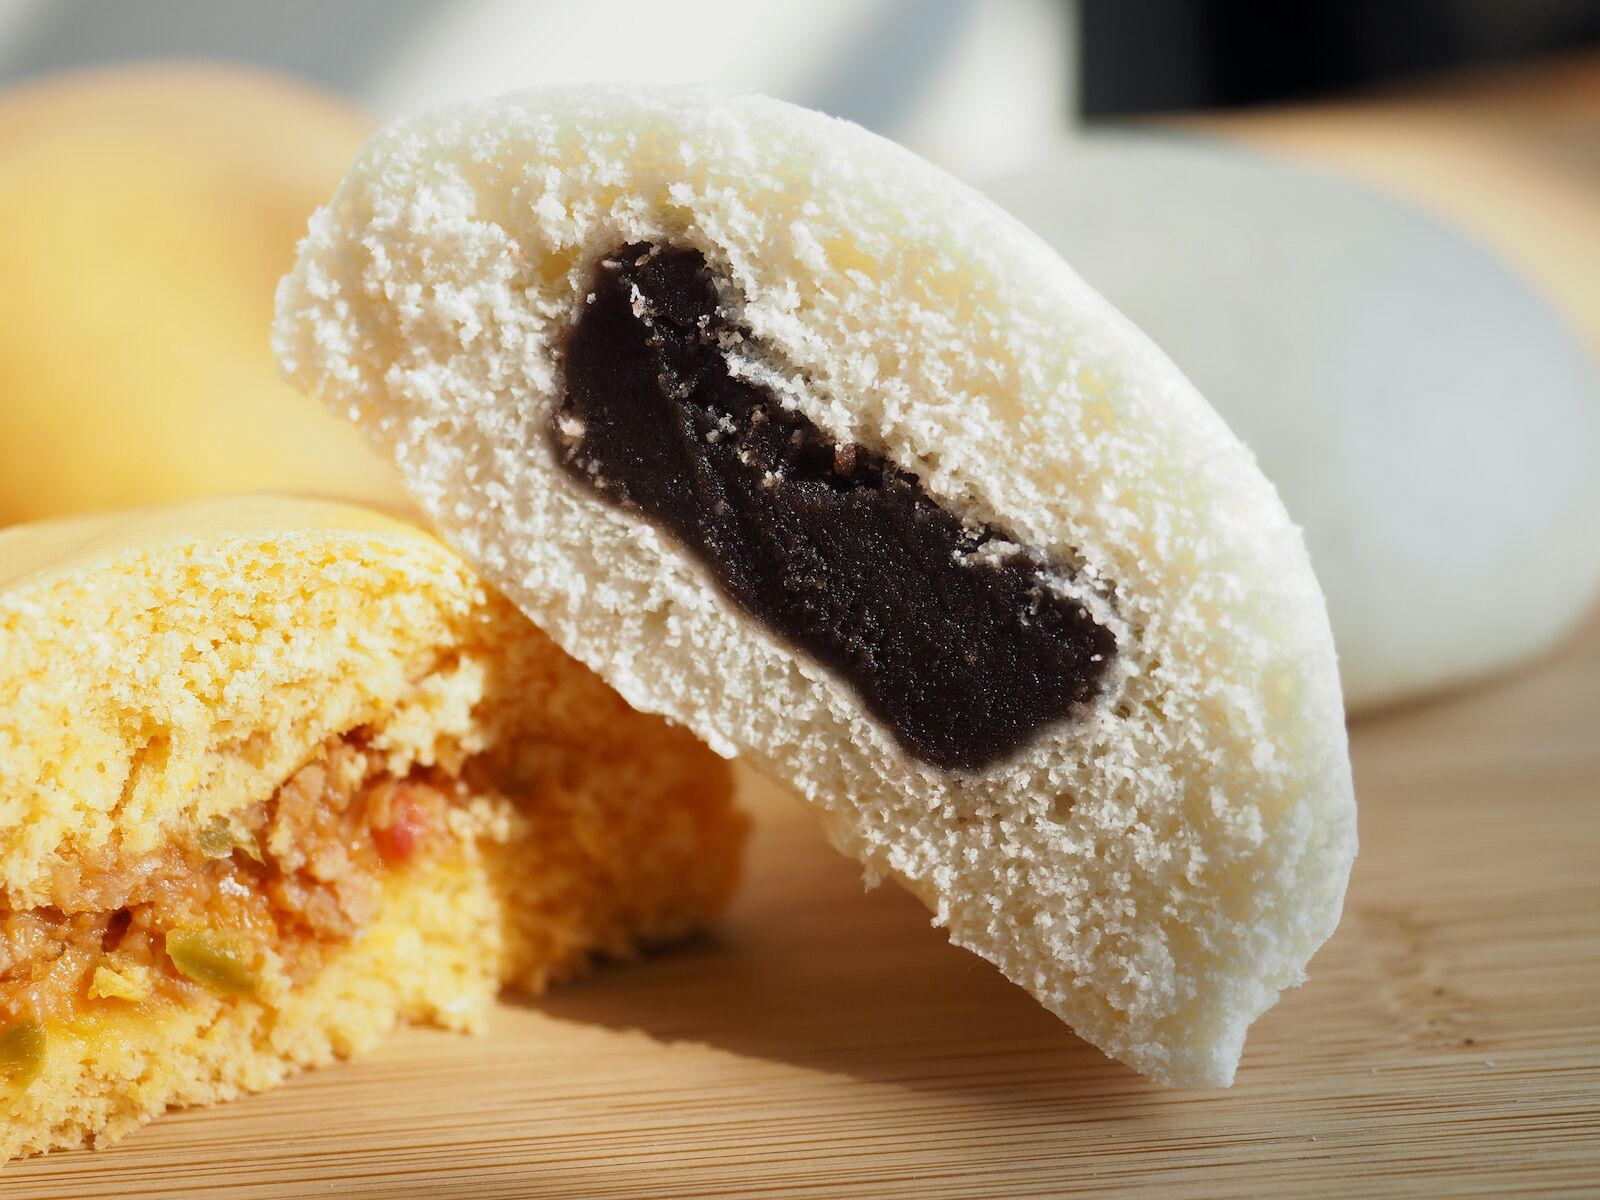 A hoppang cake cut in half to show red bean paste